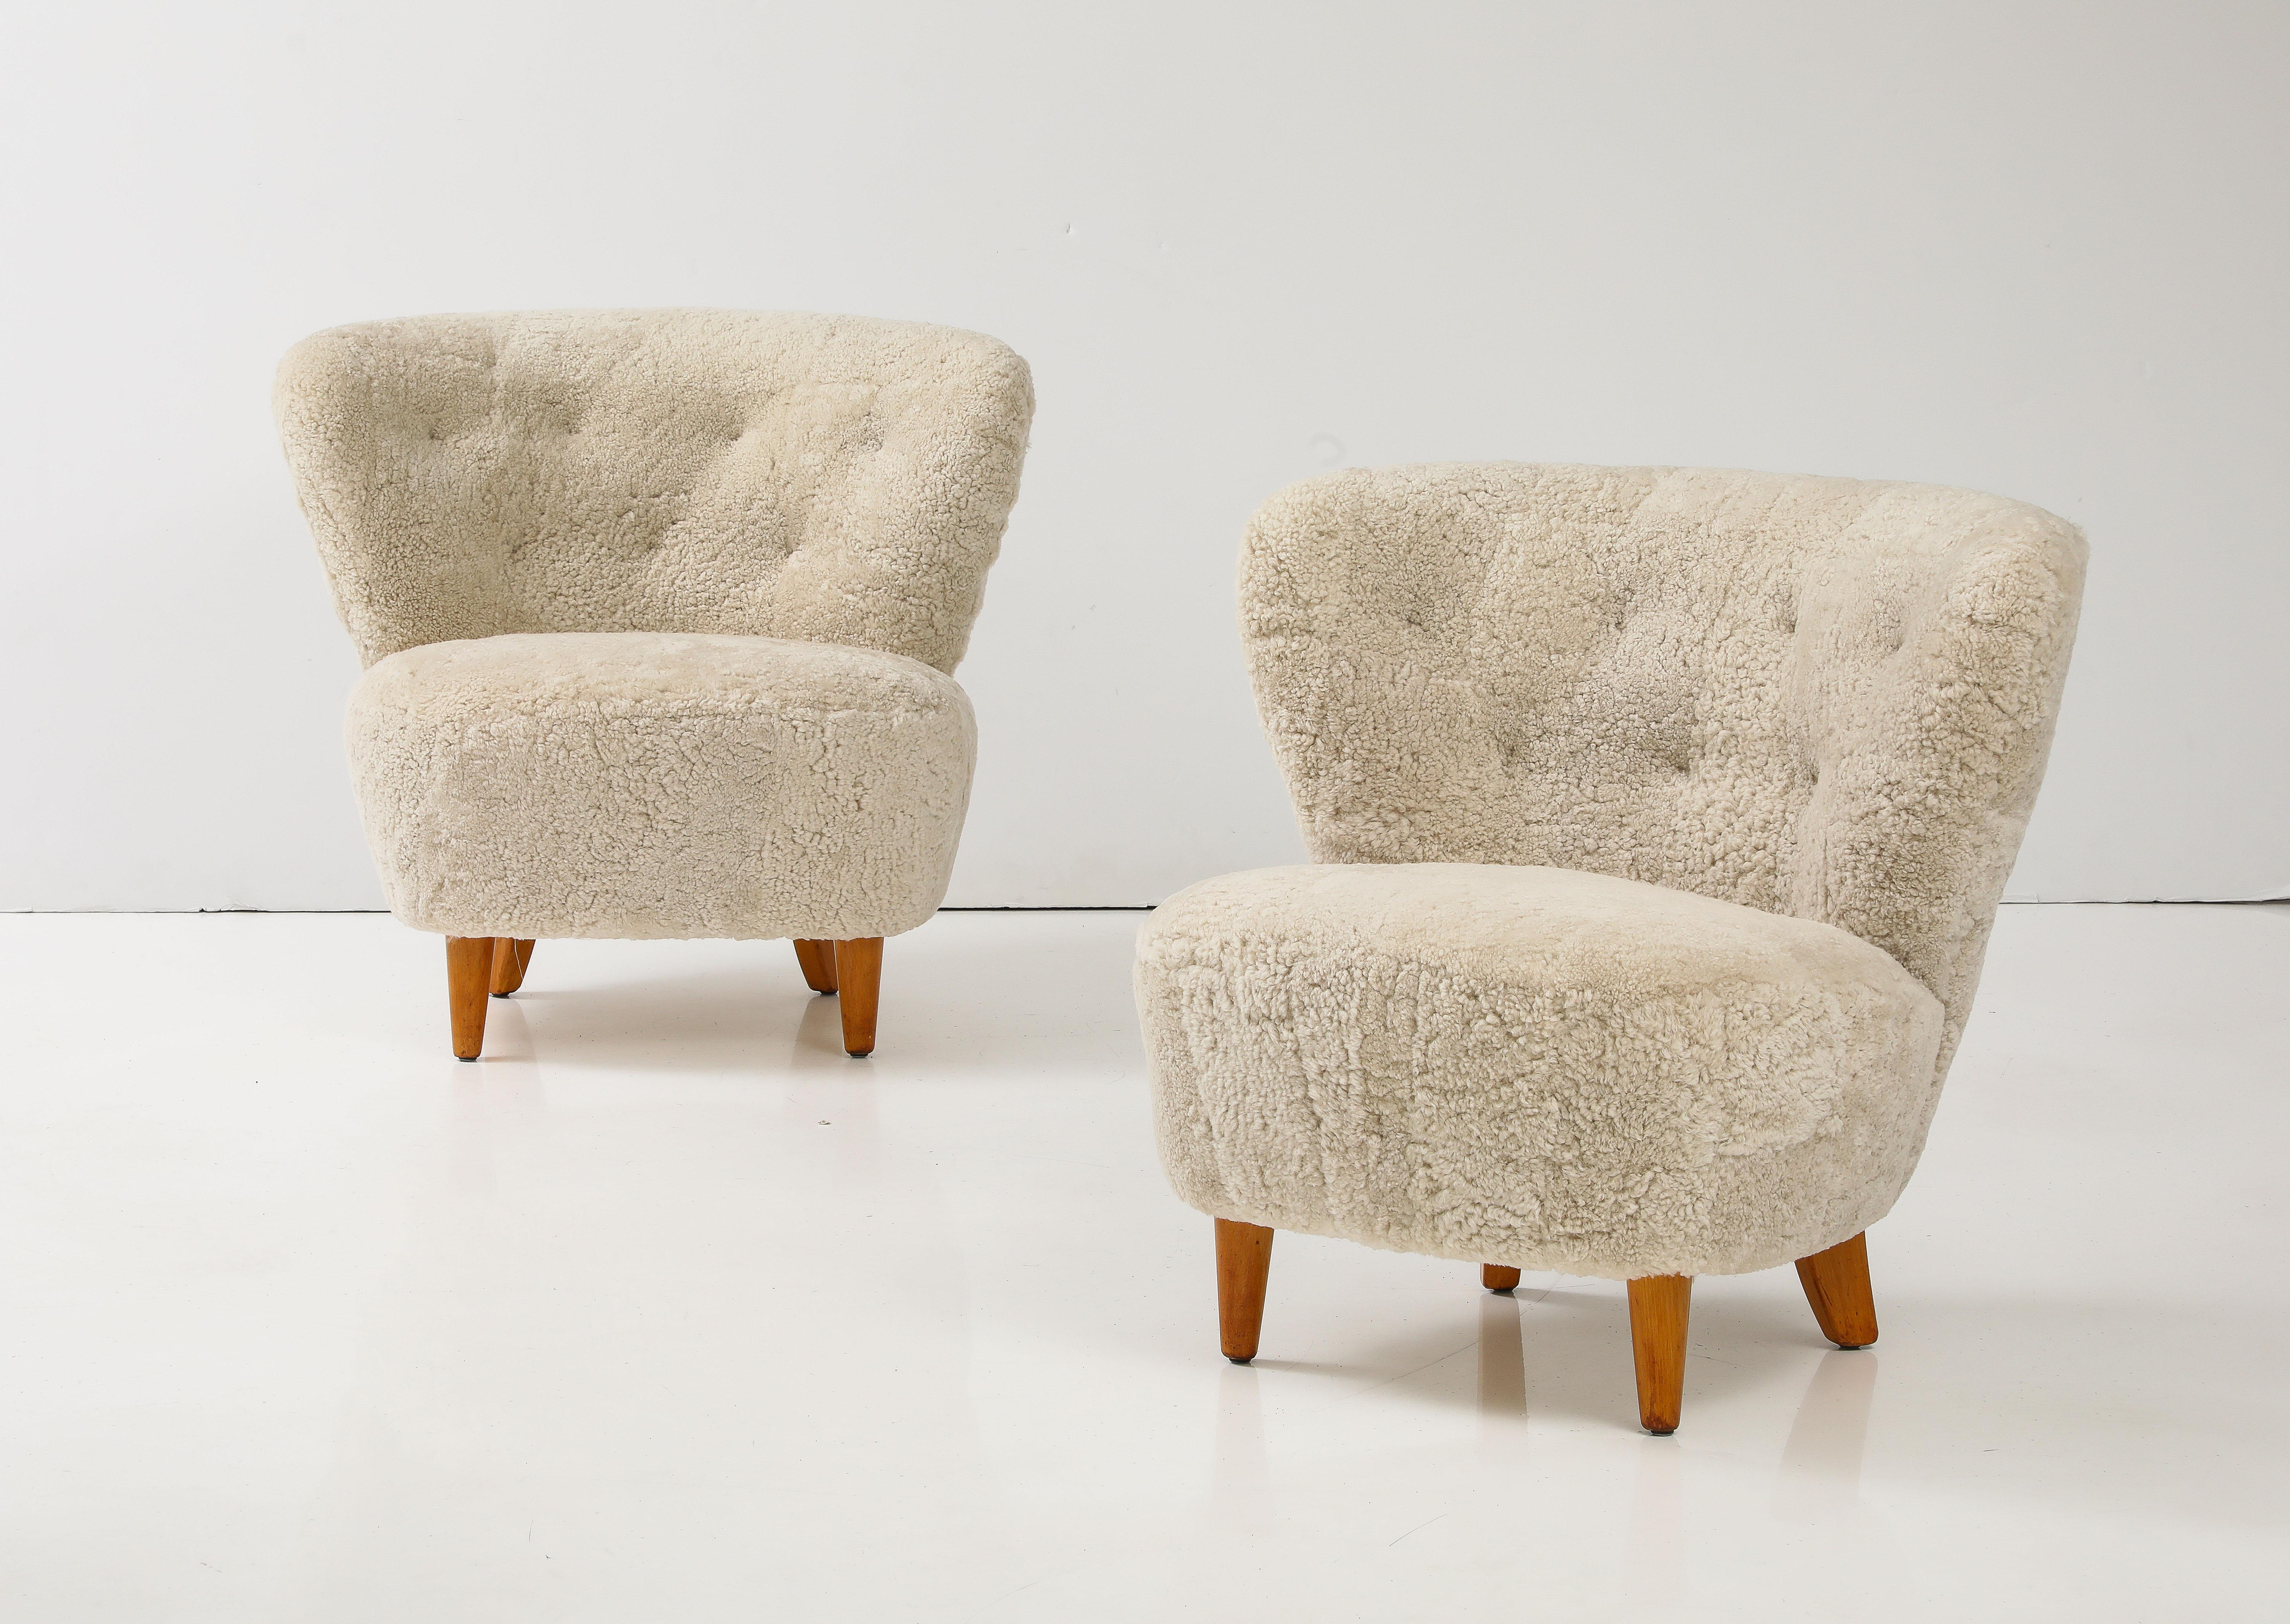 A pair of Carl-Johan Boman (Finnish 1883-1969) club chairs, Circa 1940s
Produced by Oy N. Boman AB, Turku, Finland. With generous curved backrests rand seats raised on birch legs. New off white sheepskin upholstery.
Boman was an educated designer